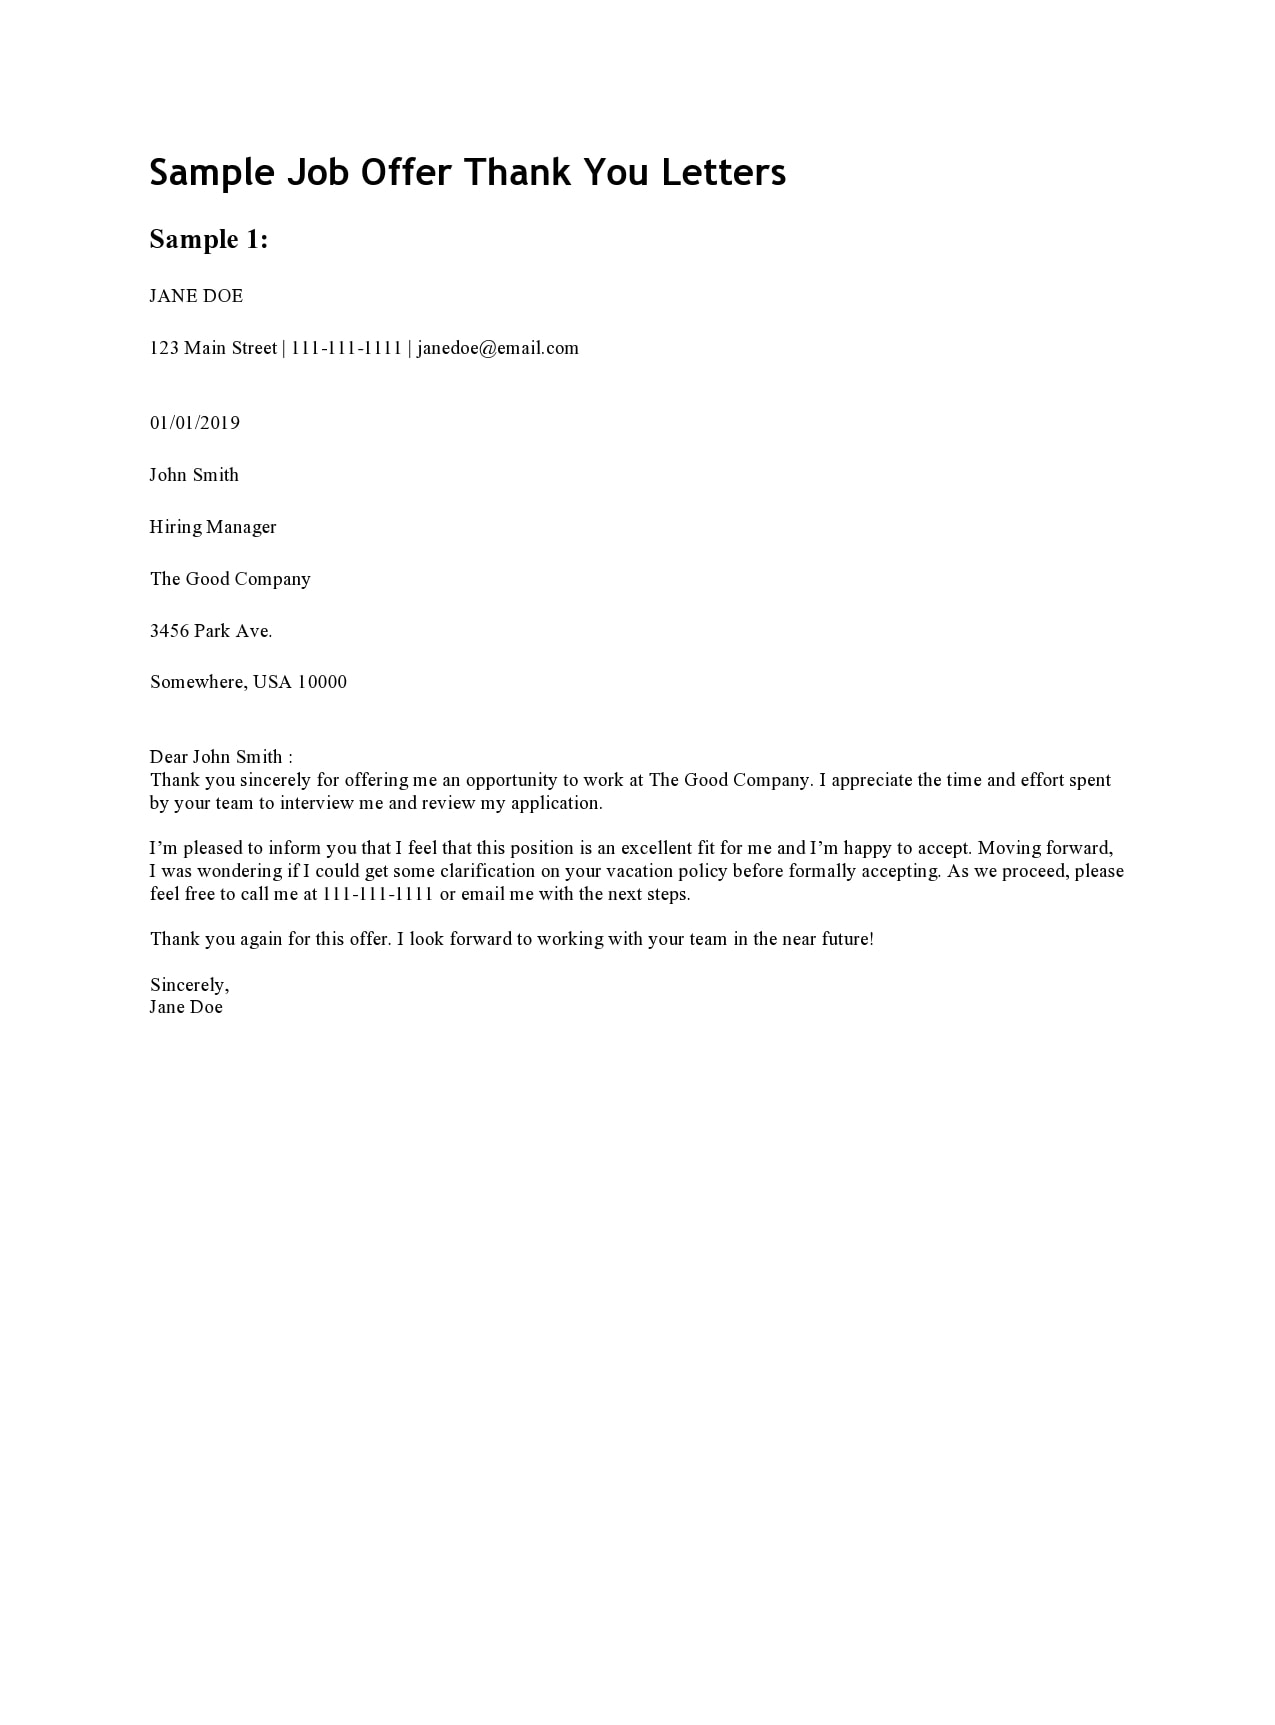 Offer Letter Email Sample from templatearchive.com